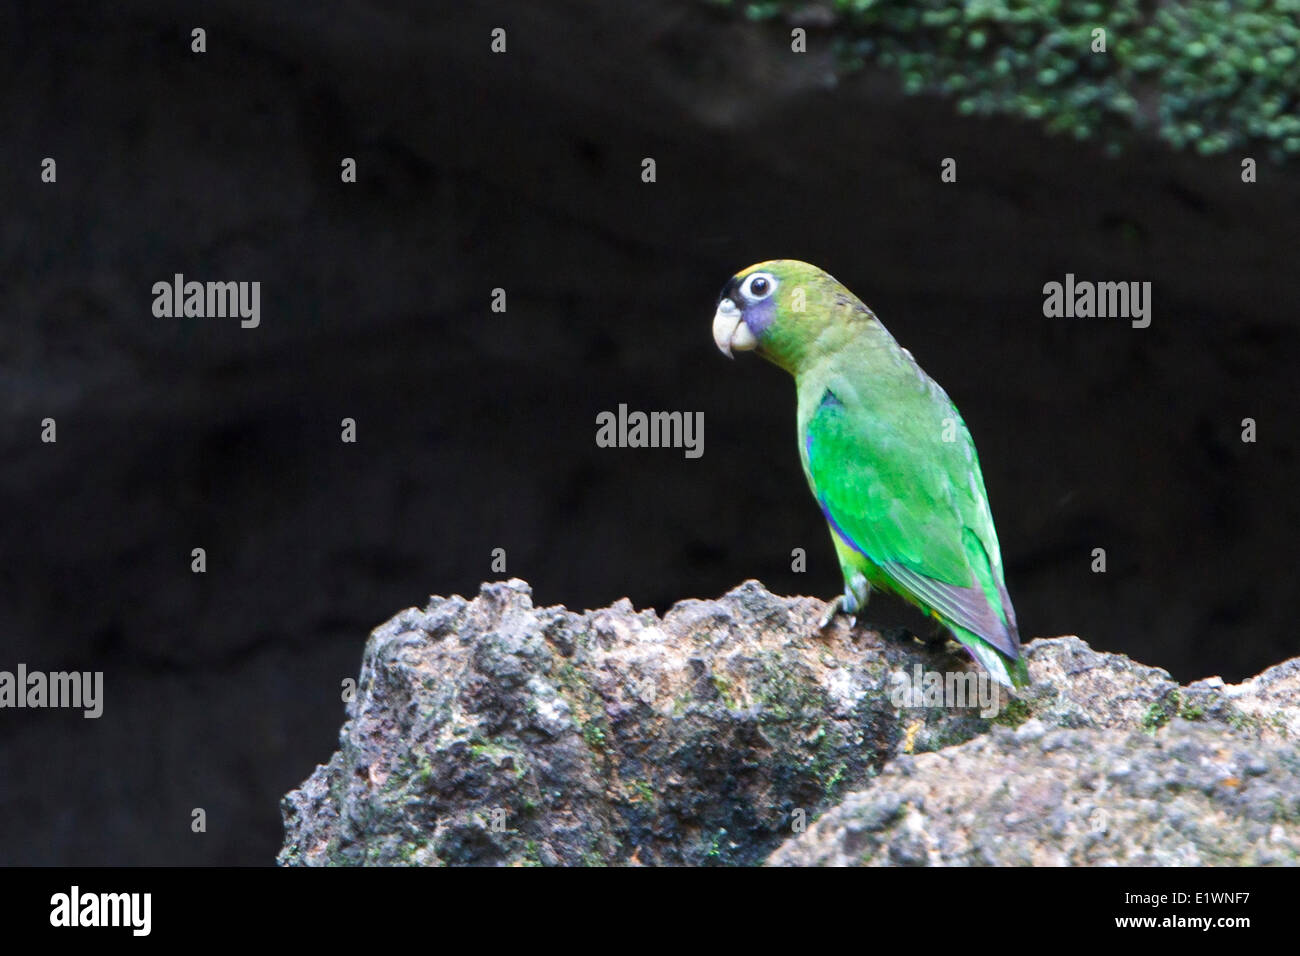 Scarlet-shouldered Parrotlet (Touit huetii) at a clay lick in the Amazon in Ecuador, South America. Stock Photo